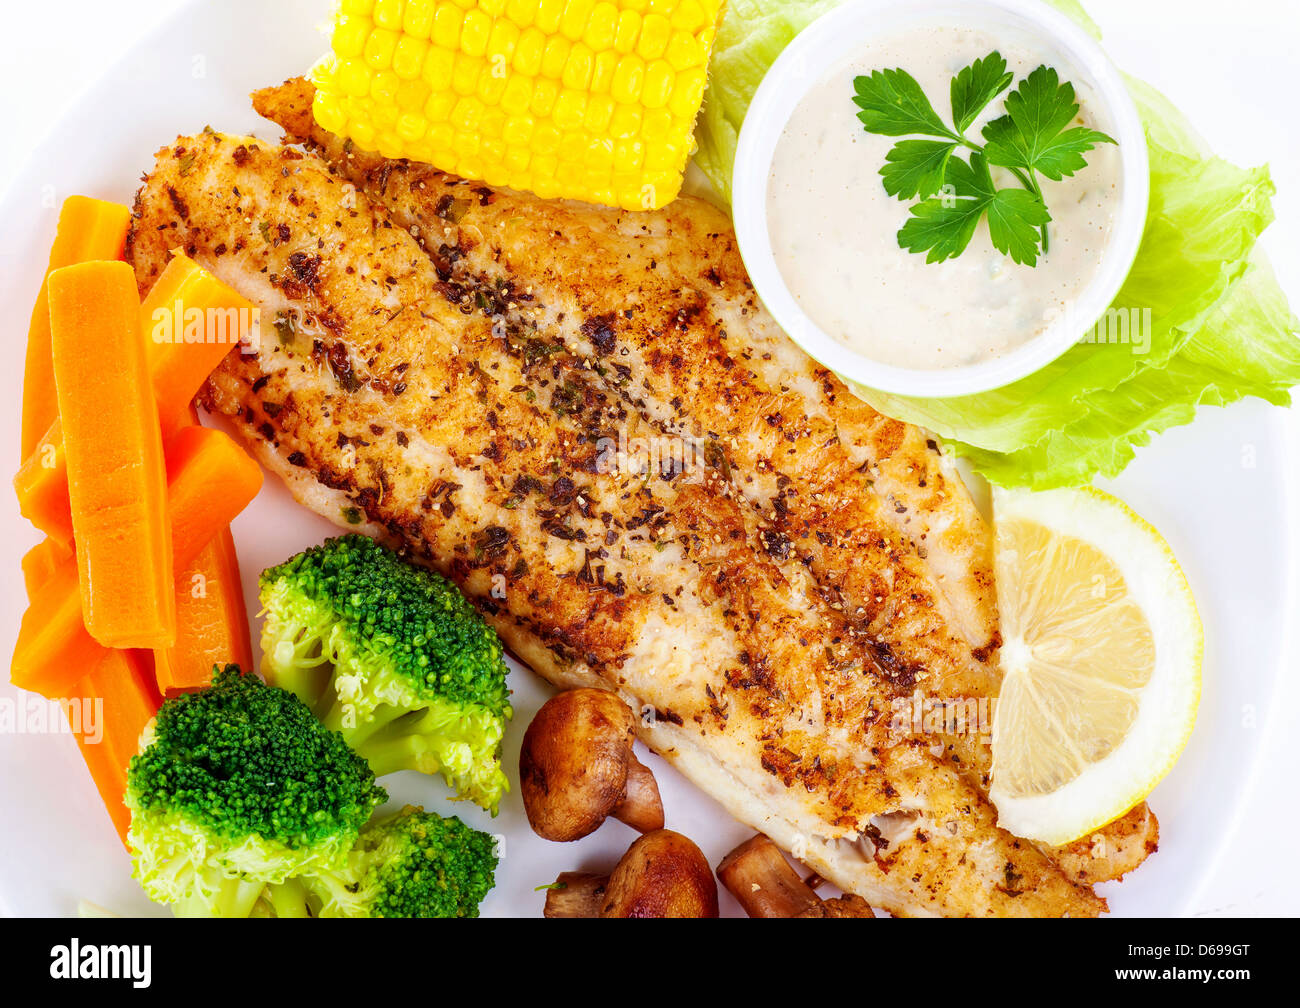 Tasty grilled fish fillet with fresh vegetables and sauce on white plate,  luxury dinner in restaurant, delicious barbecue meat Stock Photo - Alamy